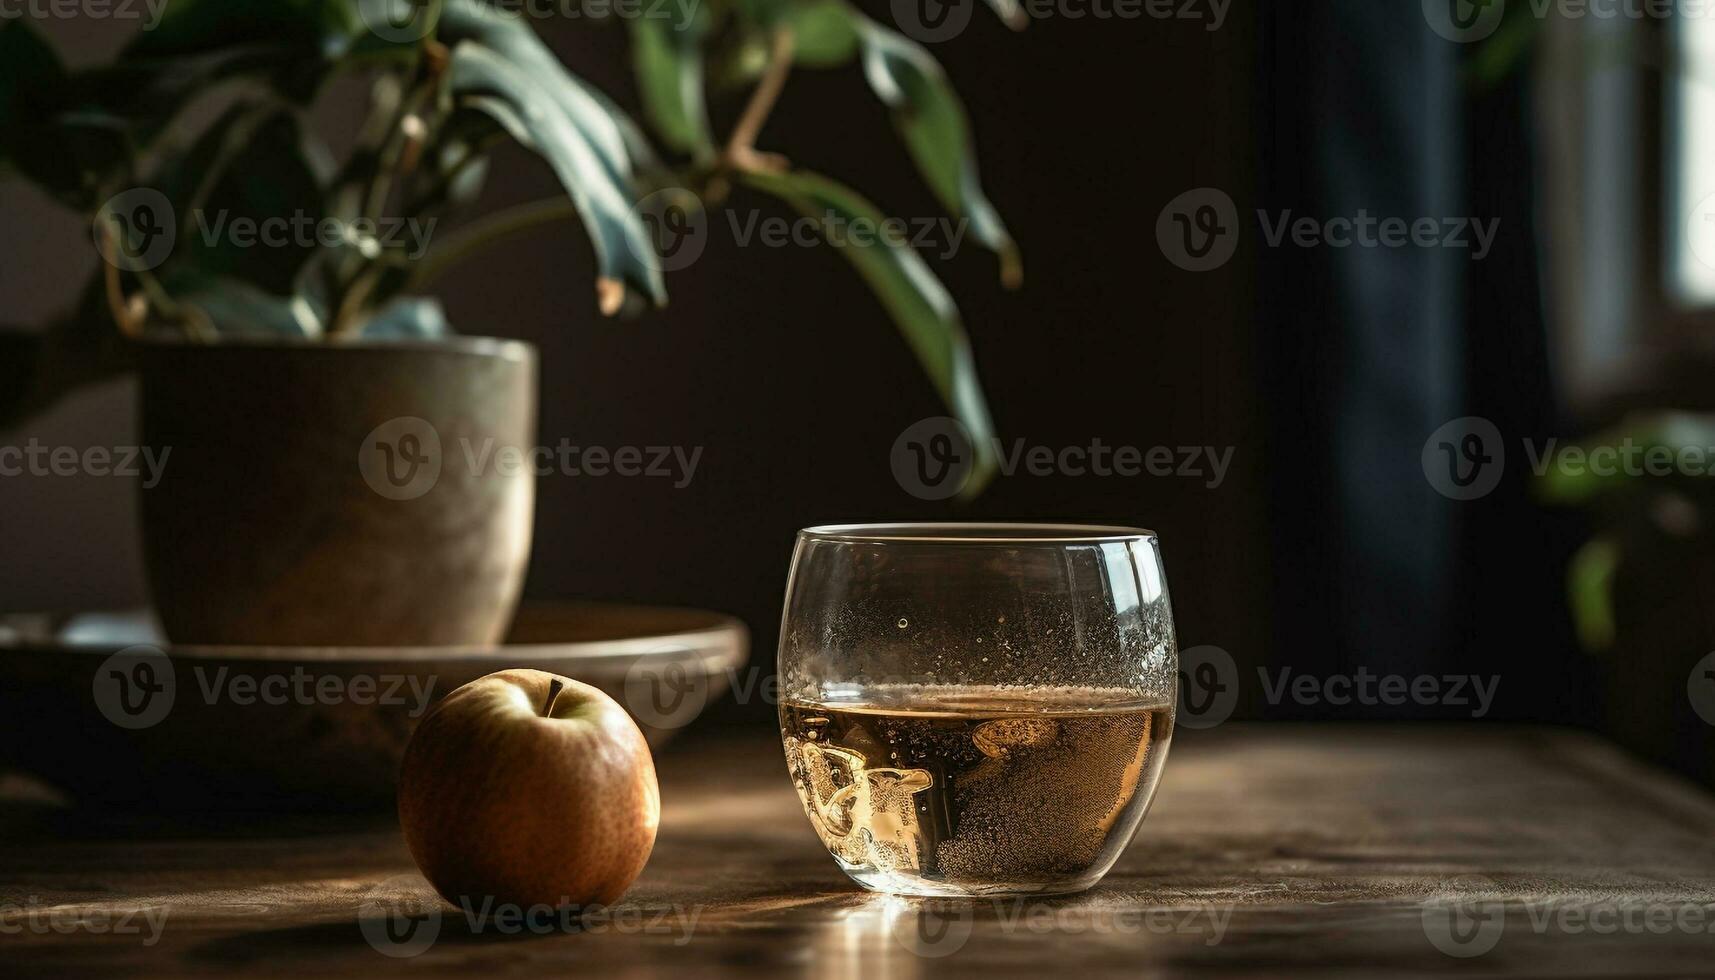 Rustic whiskey bar serves organic fruit cocktails in elegant glassware generated by AI photo